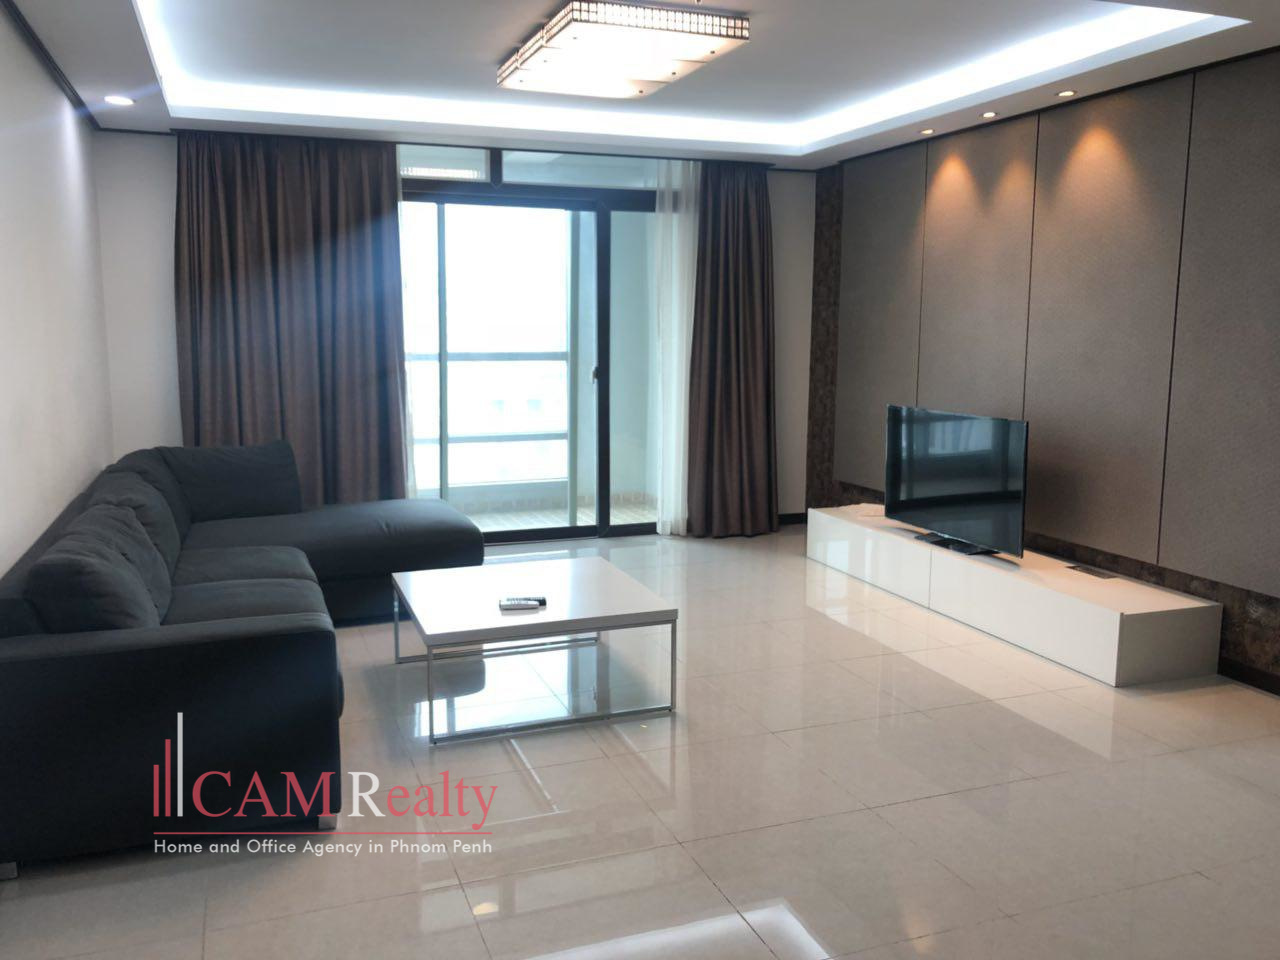 Middle of BKK1 area| Spacious 3 bedrooms serviced condominium for rent in Phnom Penh| Pool, gym, steam & sauna